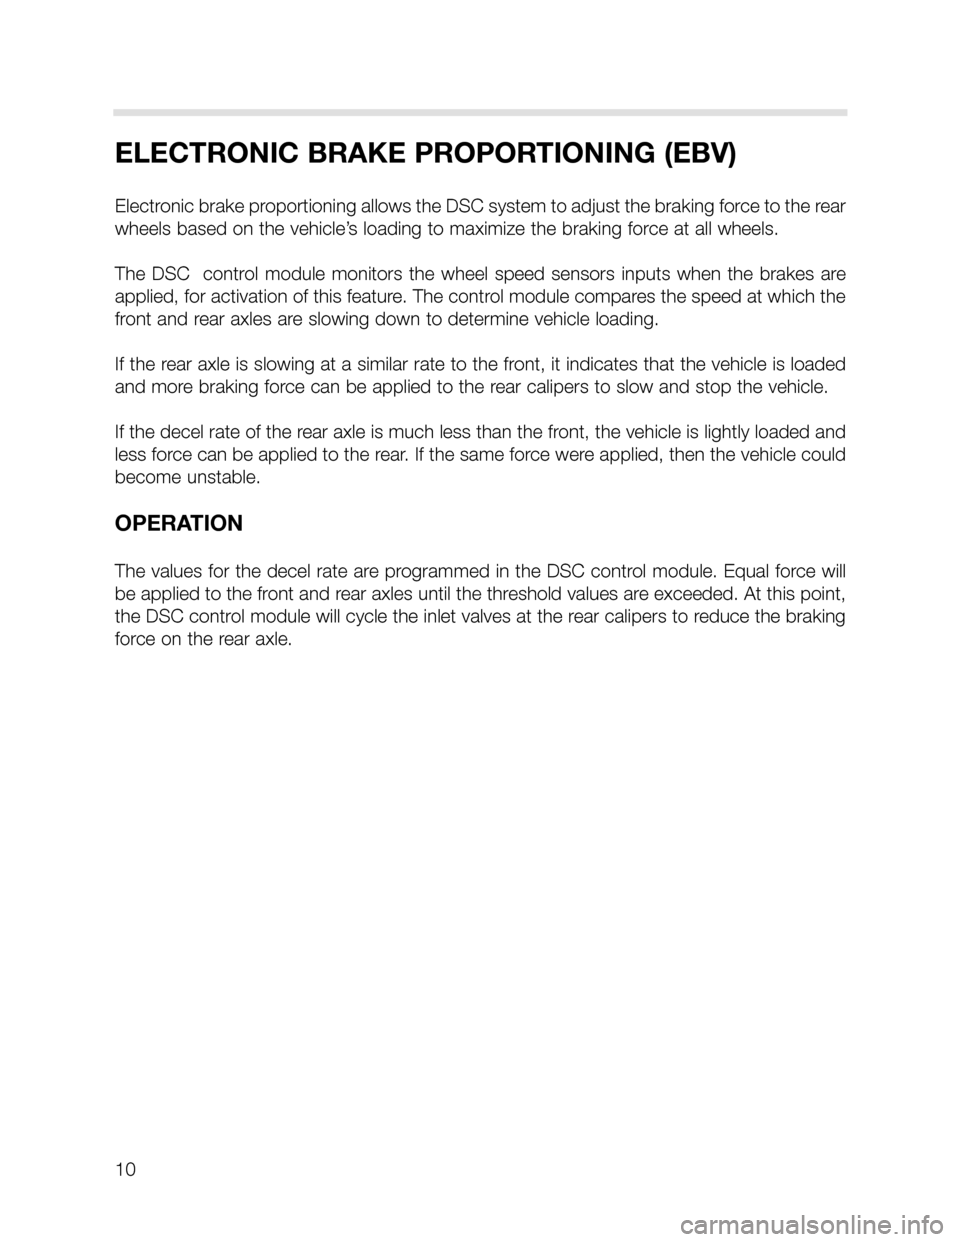 BMW X5 2005 E53 DSC System Workshop Manual 10
ELECTRONIC BRAKE PROPORTIONING (EBV)
Electronic brake proportioning allows the DSC system to adjust the braking force to the rear
wheels based on the vehicle’s loading to maximize the braking for